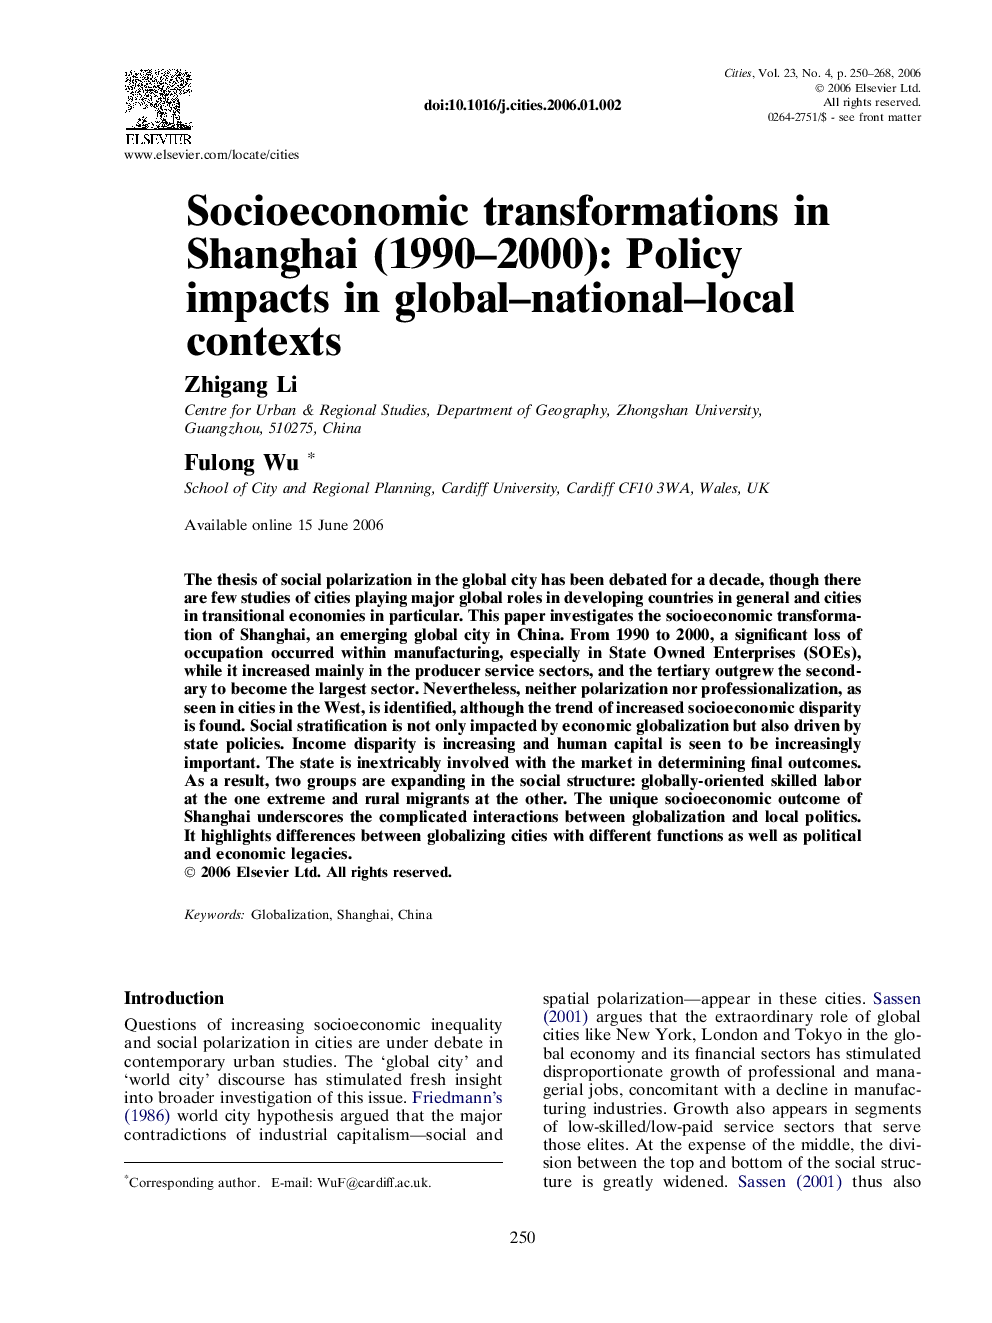 Socioeconomic transformations in Shanghai (1990–2000): Policy impacts in global–national–local contexts